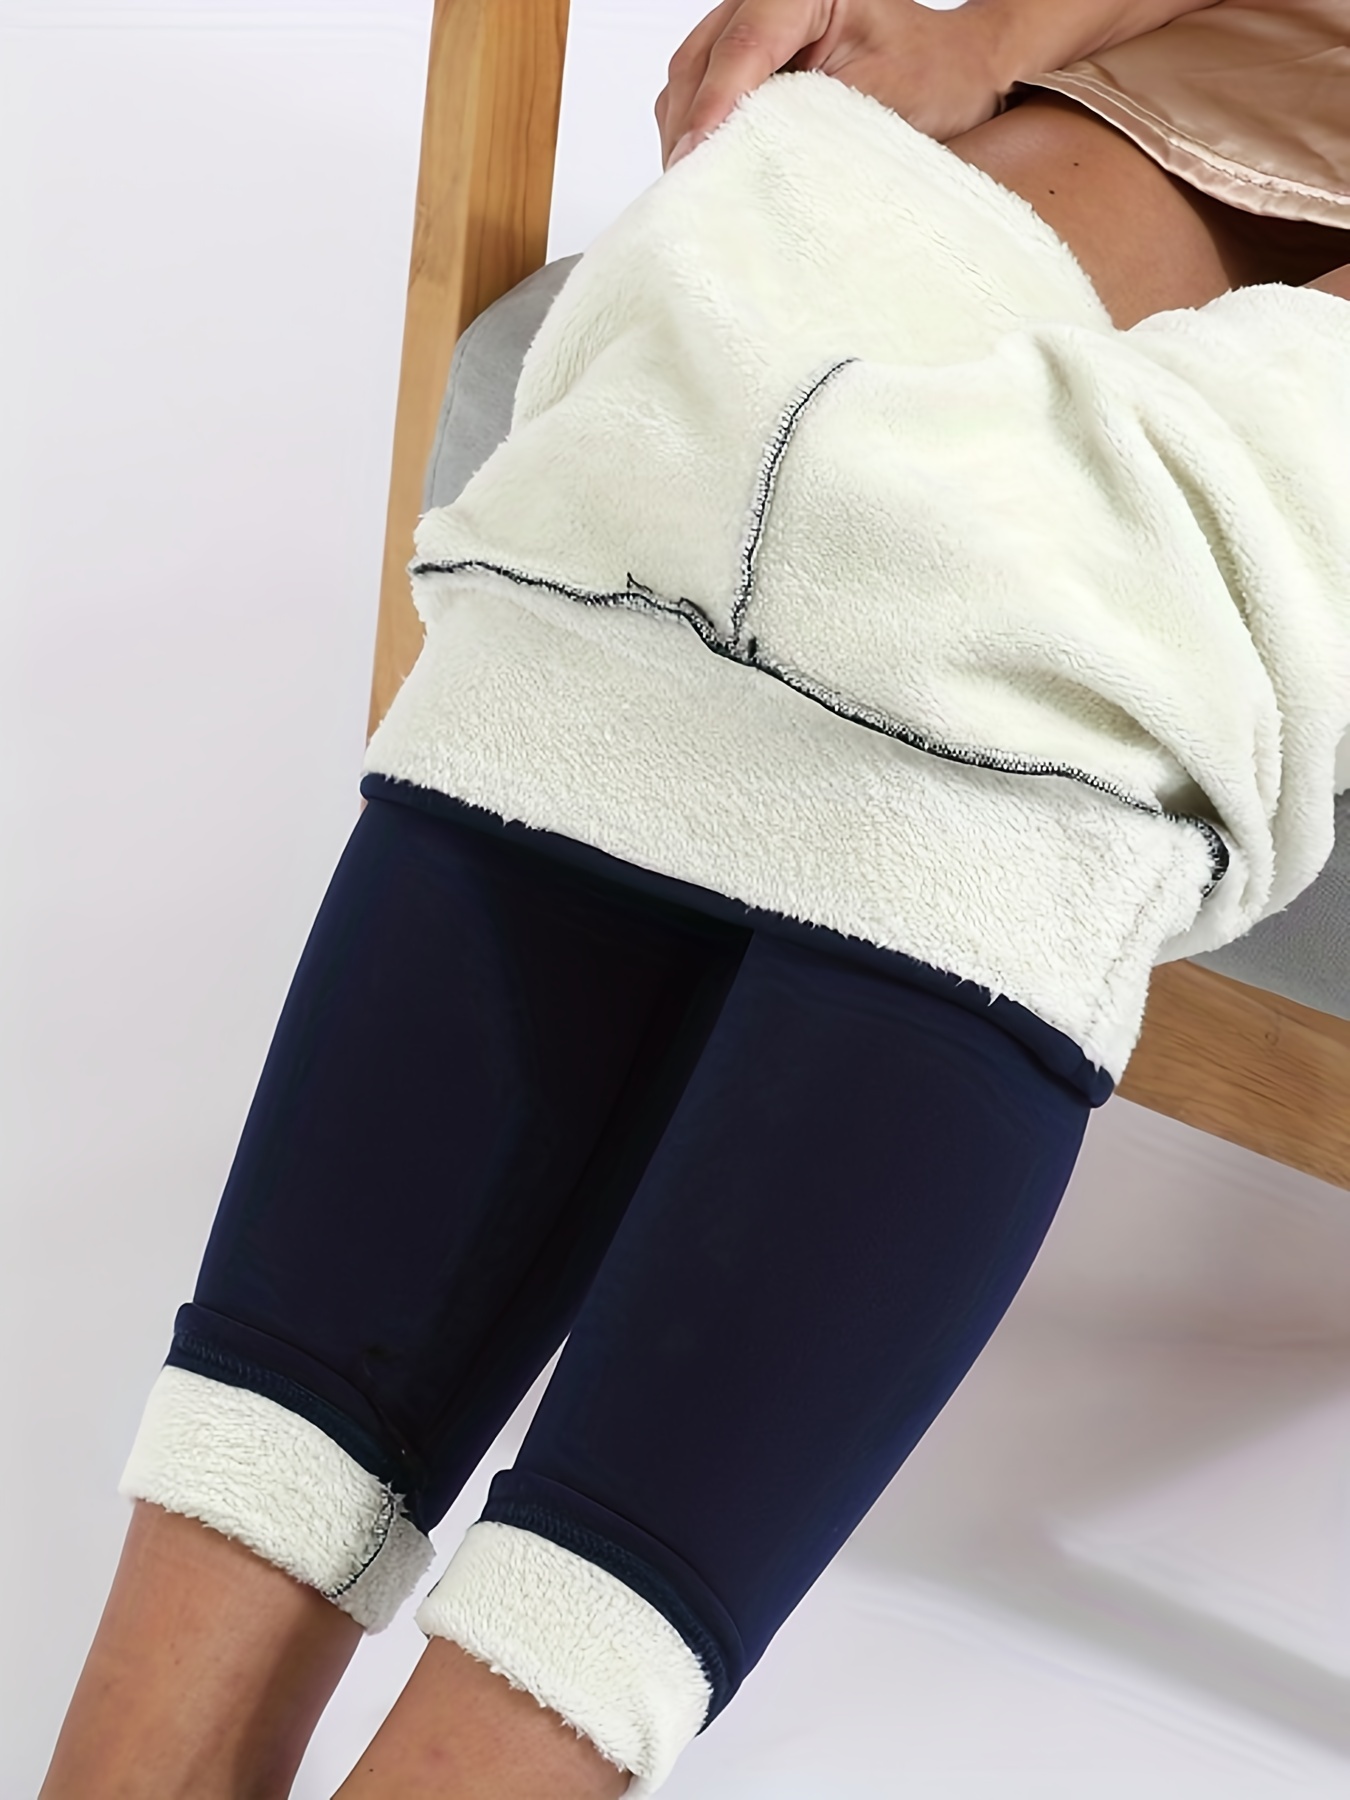 Winter Sherpa Fleece Lined Leggings for Women, High Waist Stretchy Thick  Cashmere Leggings Plush Warm Thermal Pants - AliExpress